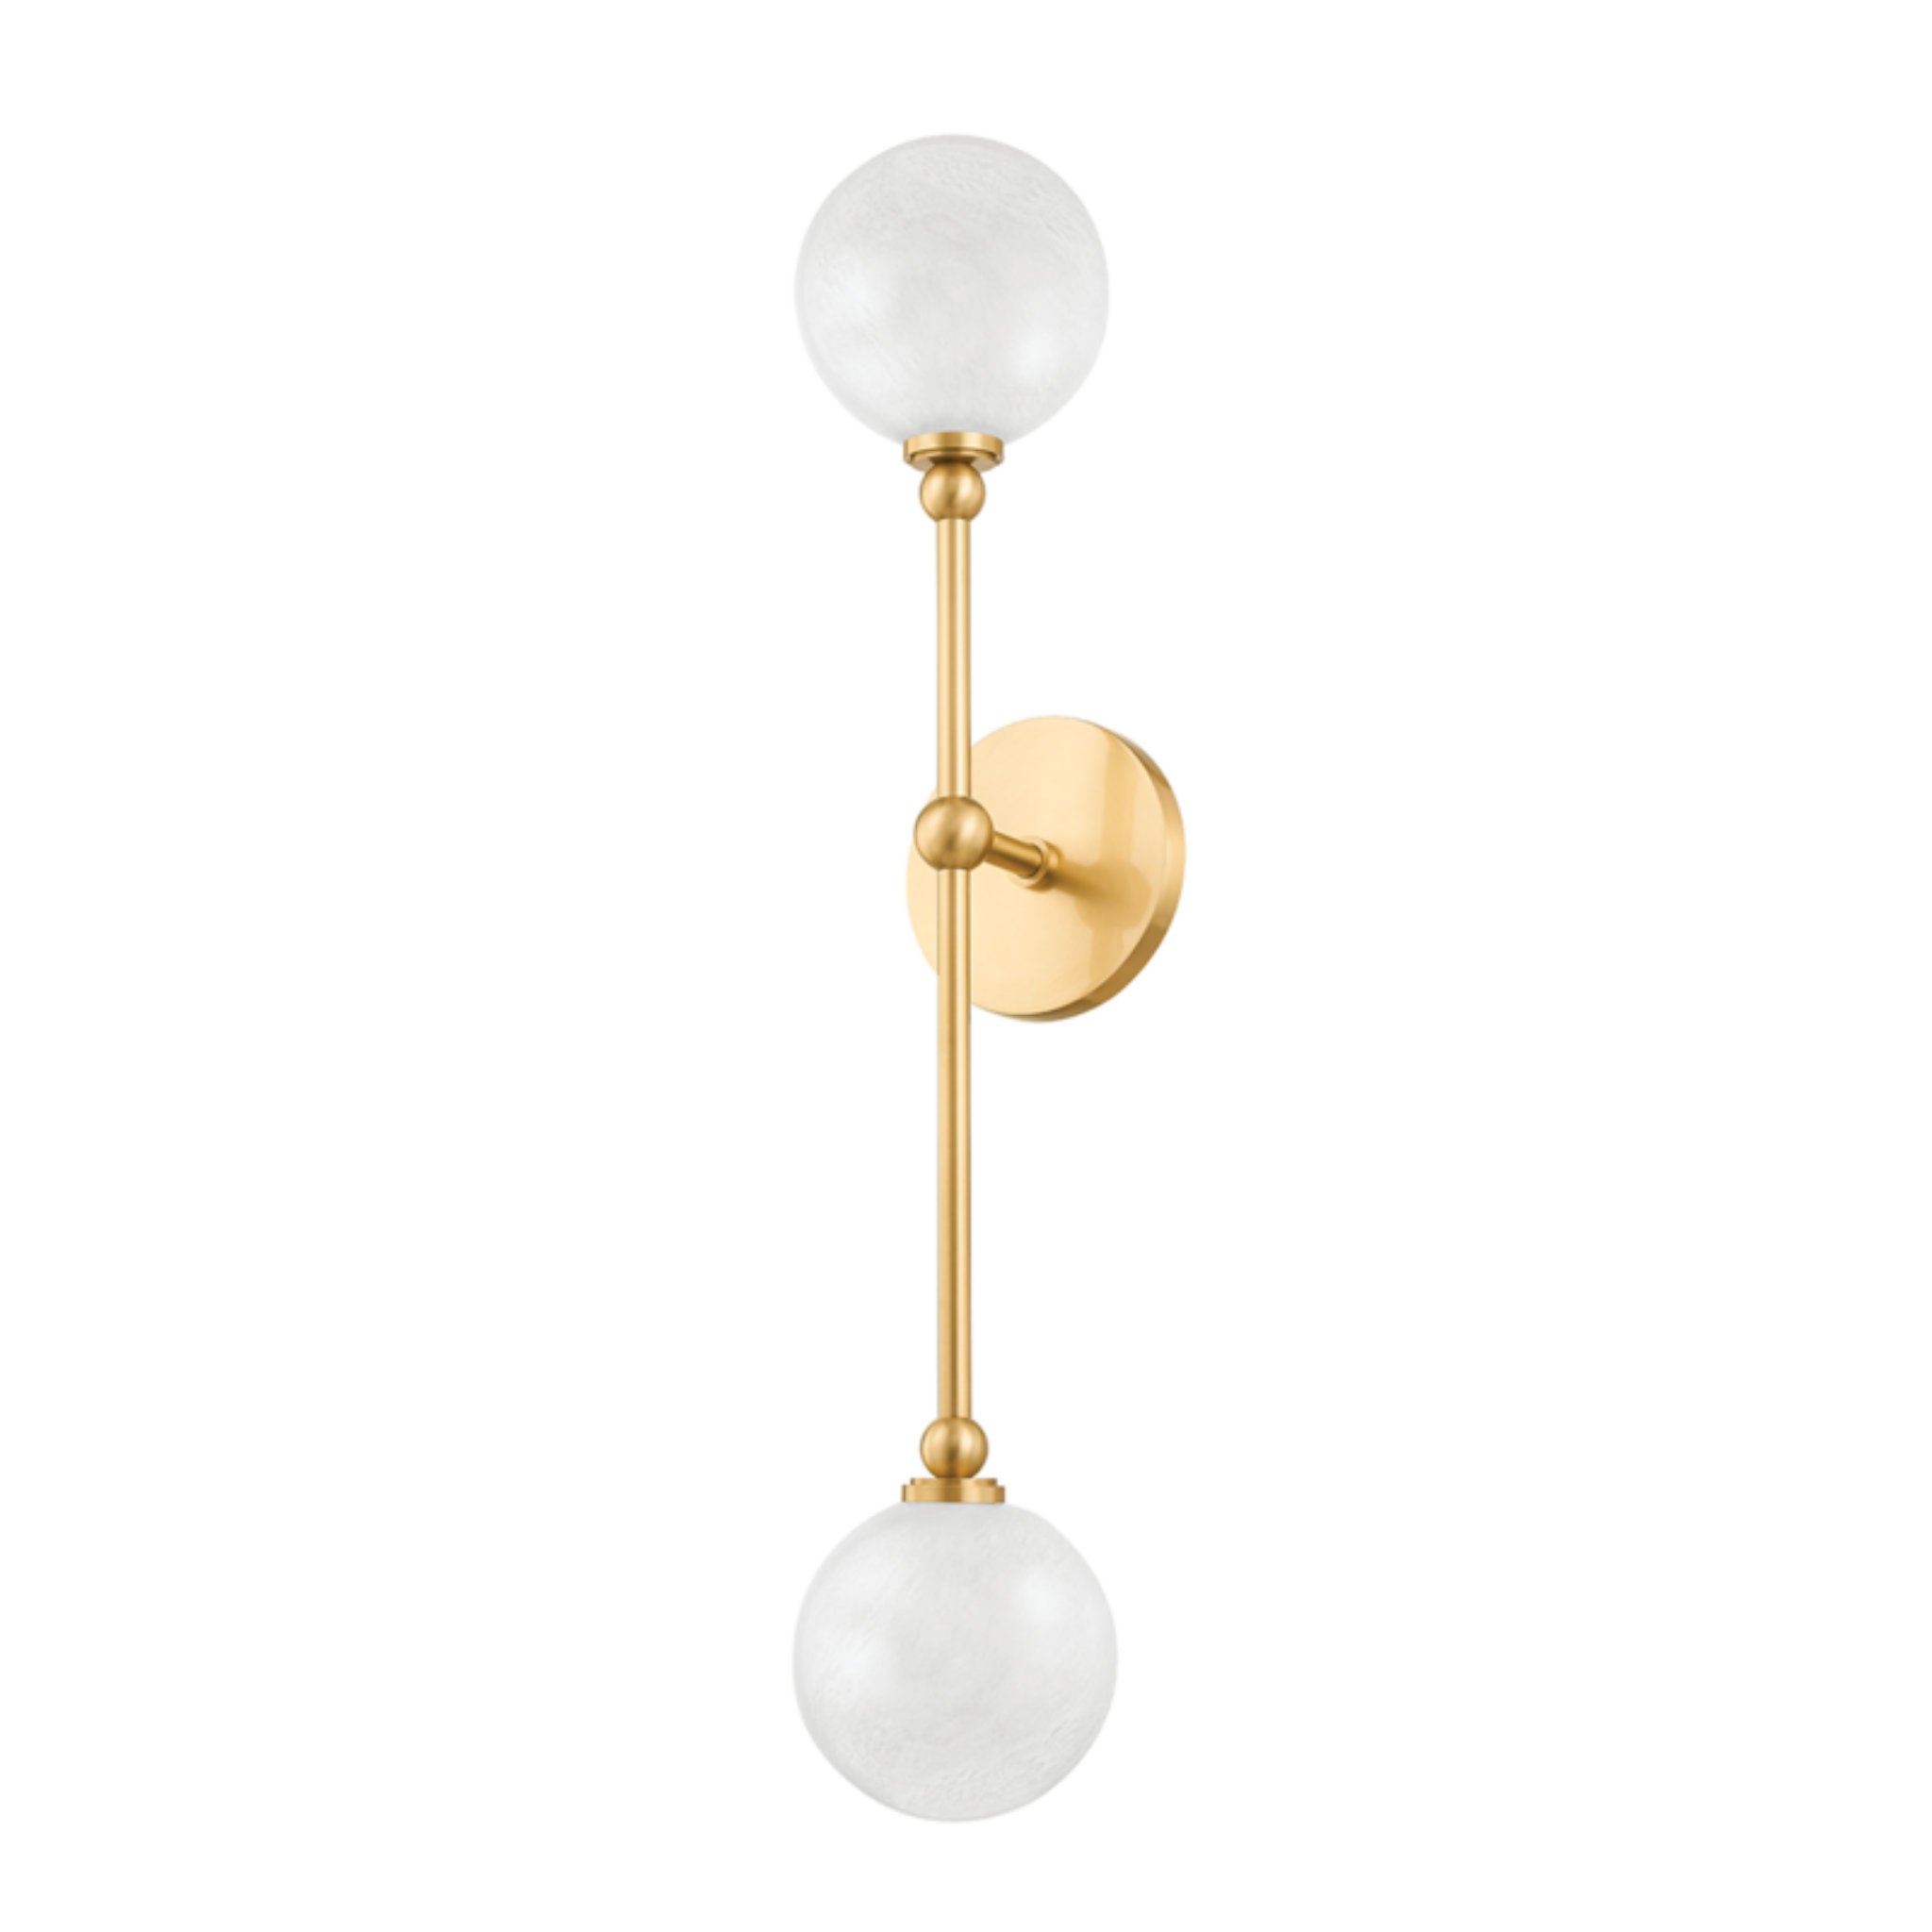 Andrews 2 Light Wall Sconce in Aged Brass